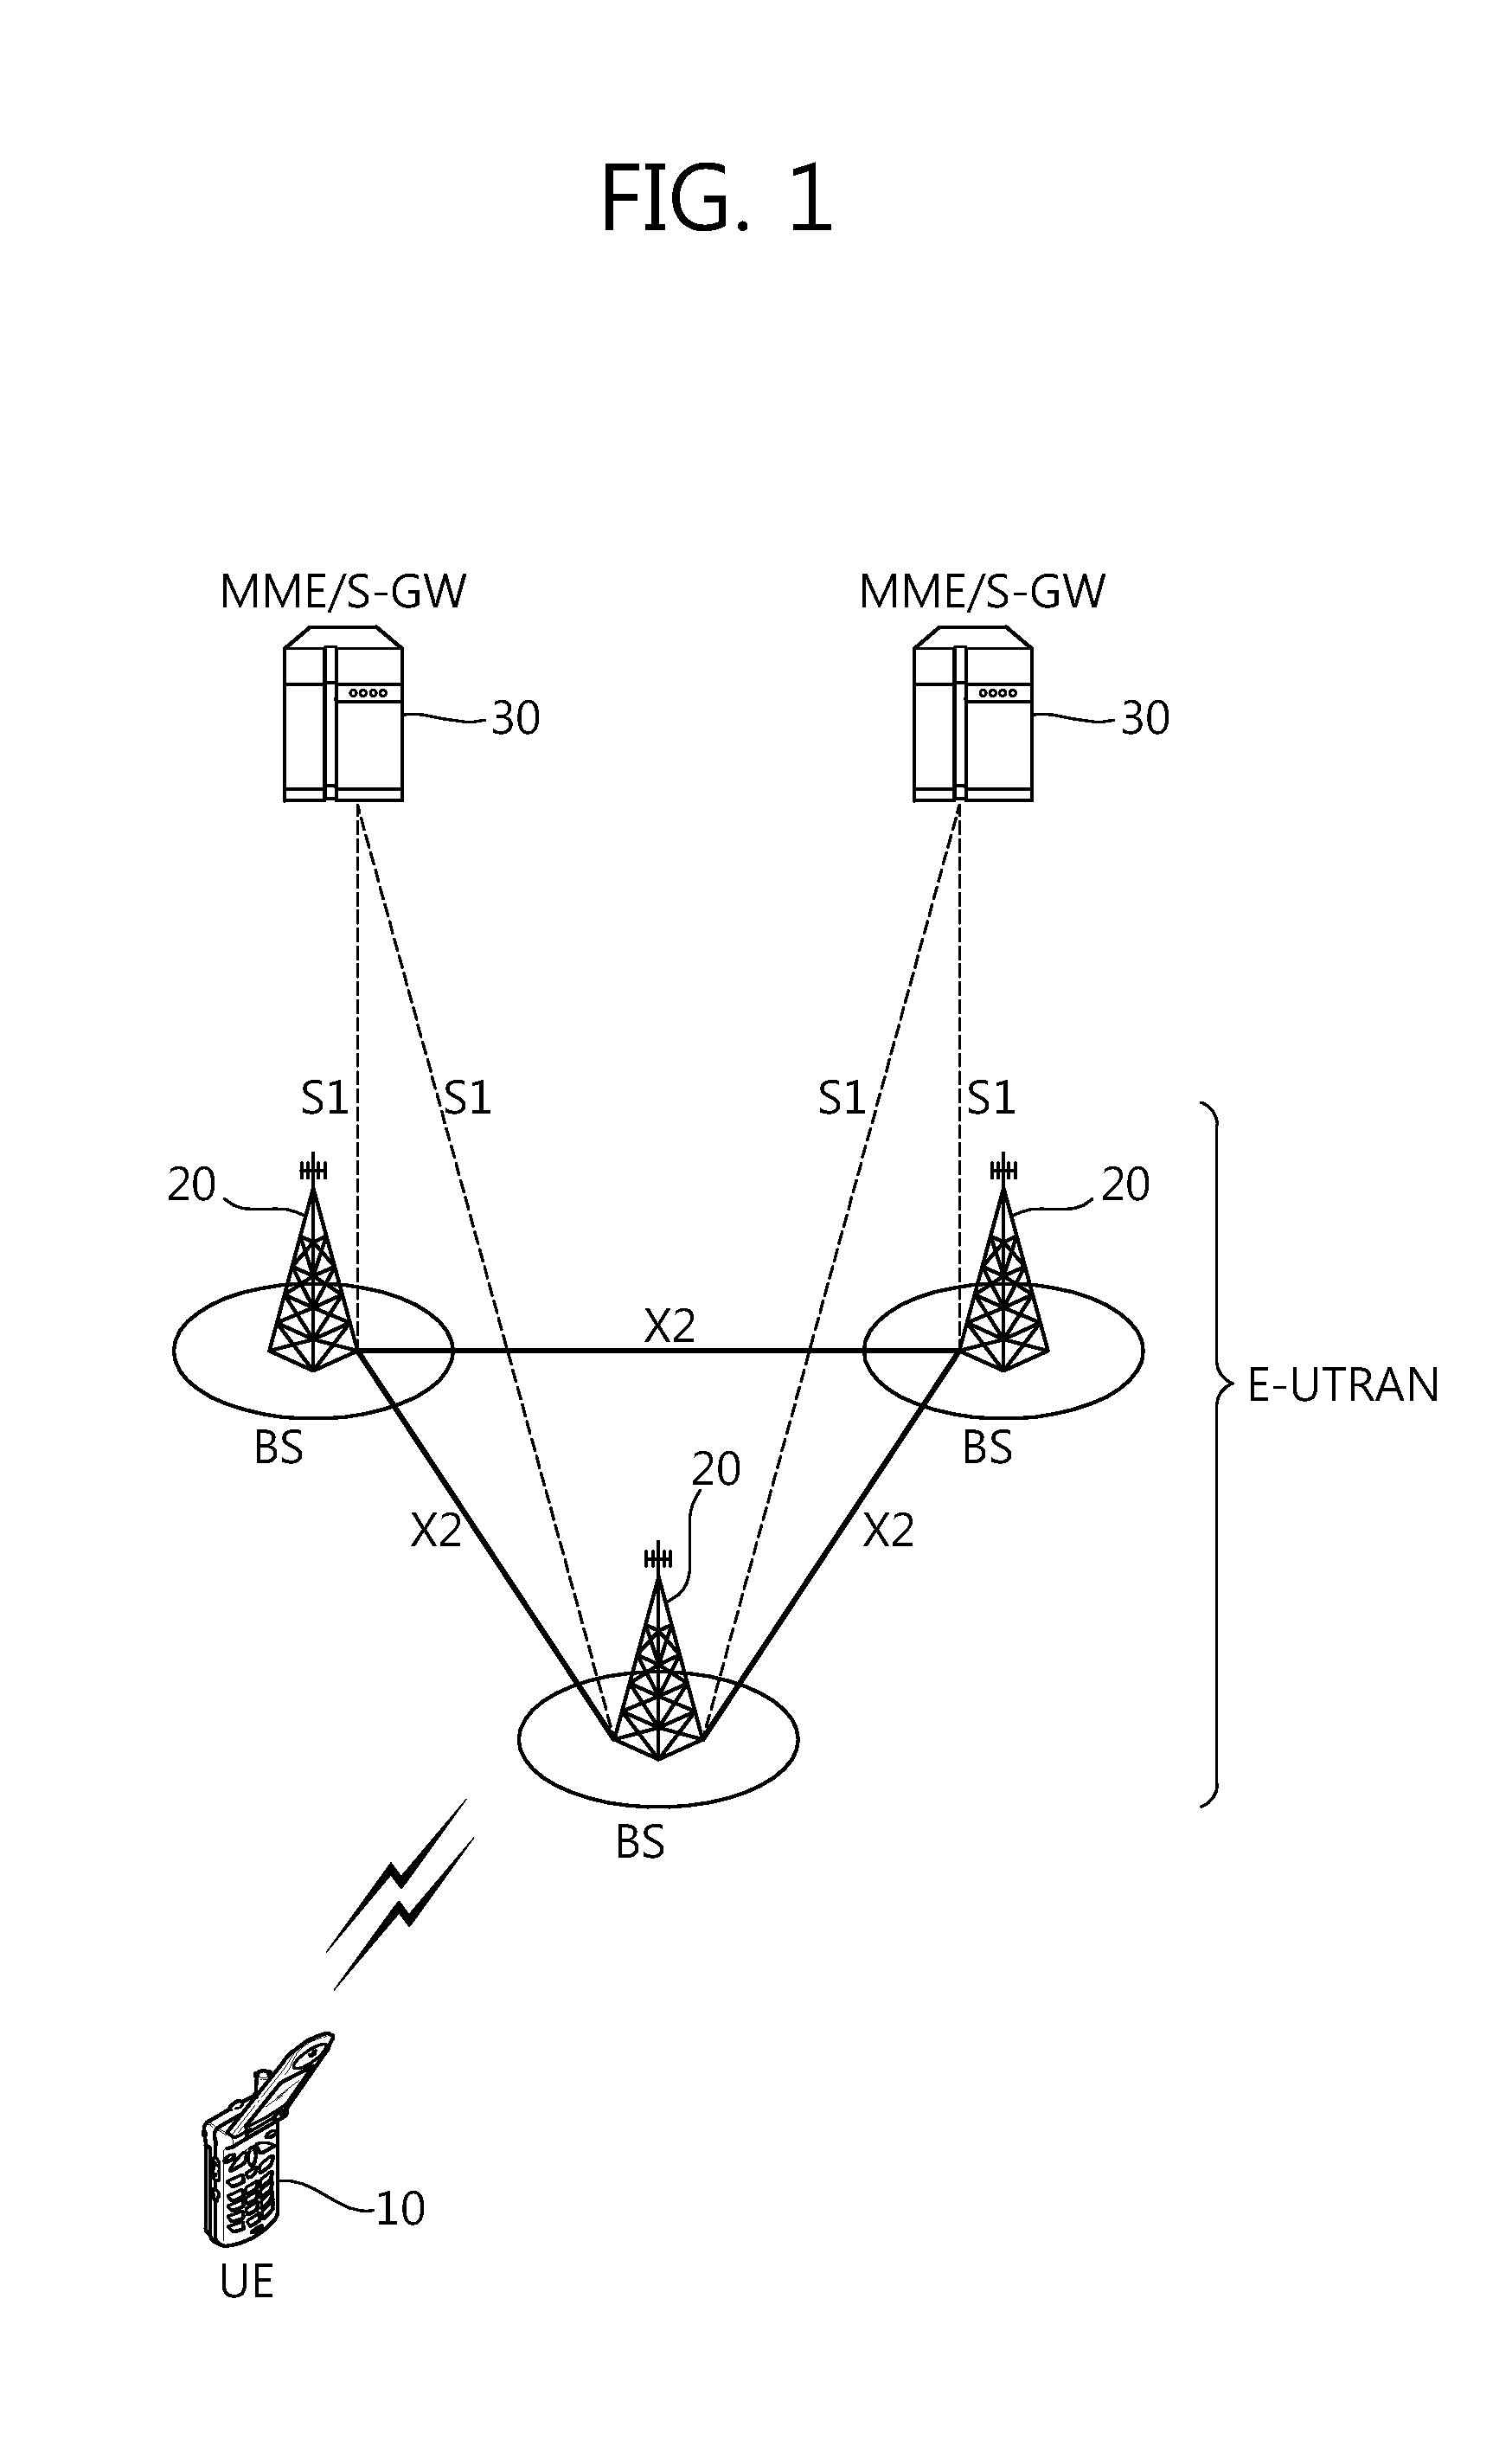 Method and apparatus for fdd/tdd intra-node and inter-node carrier aggregation